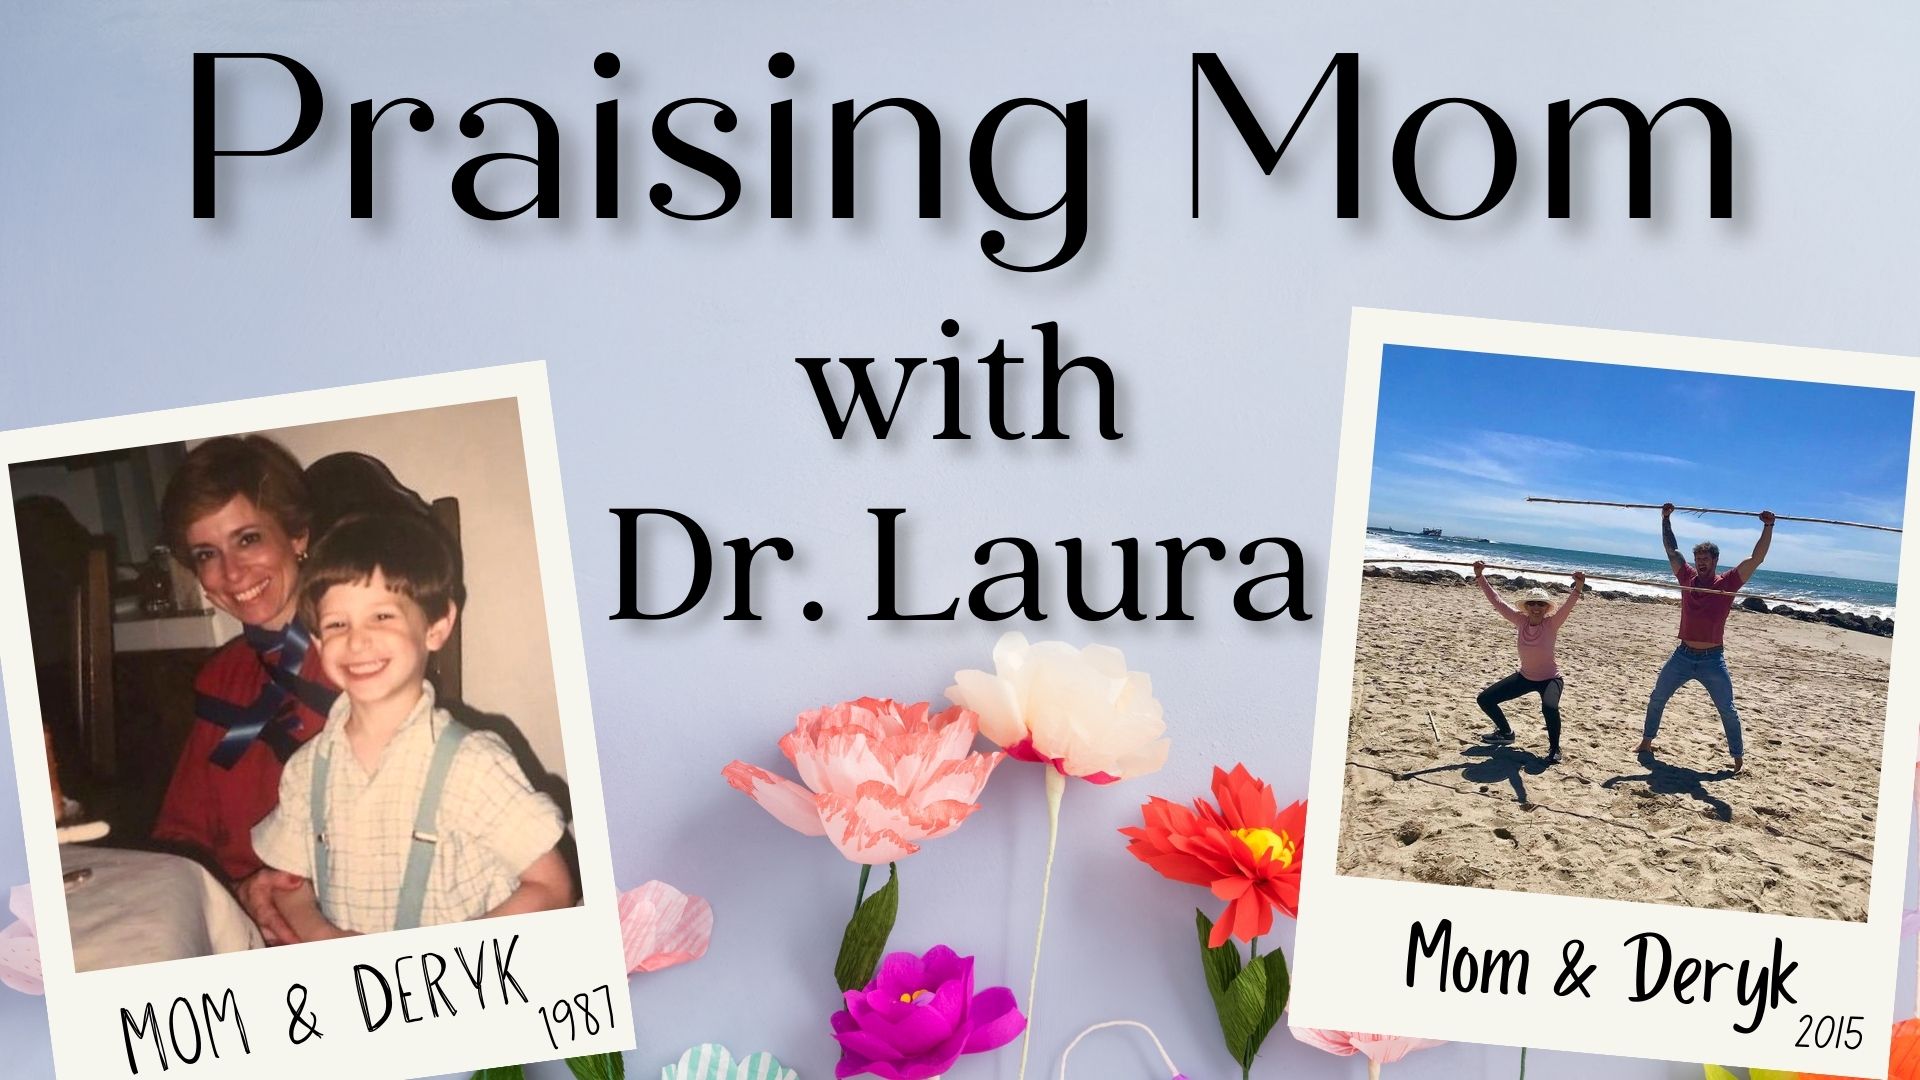 YouTube: Praising Mom with Dr. Laura